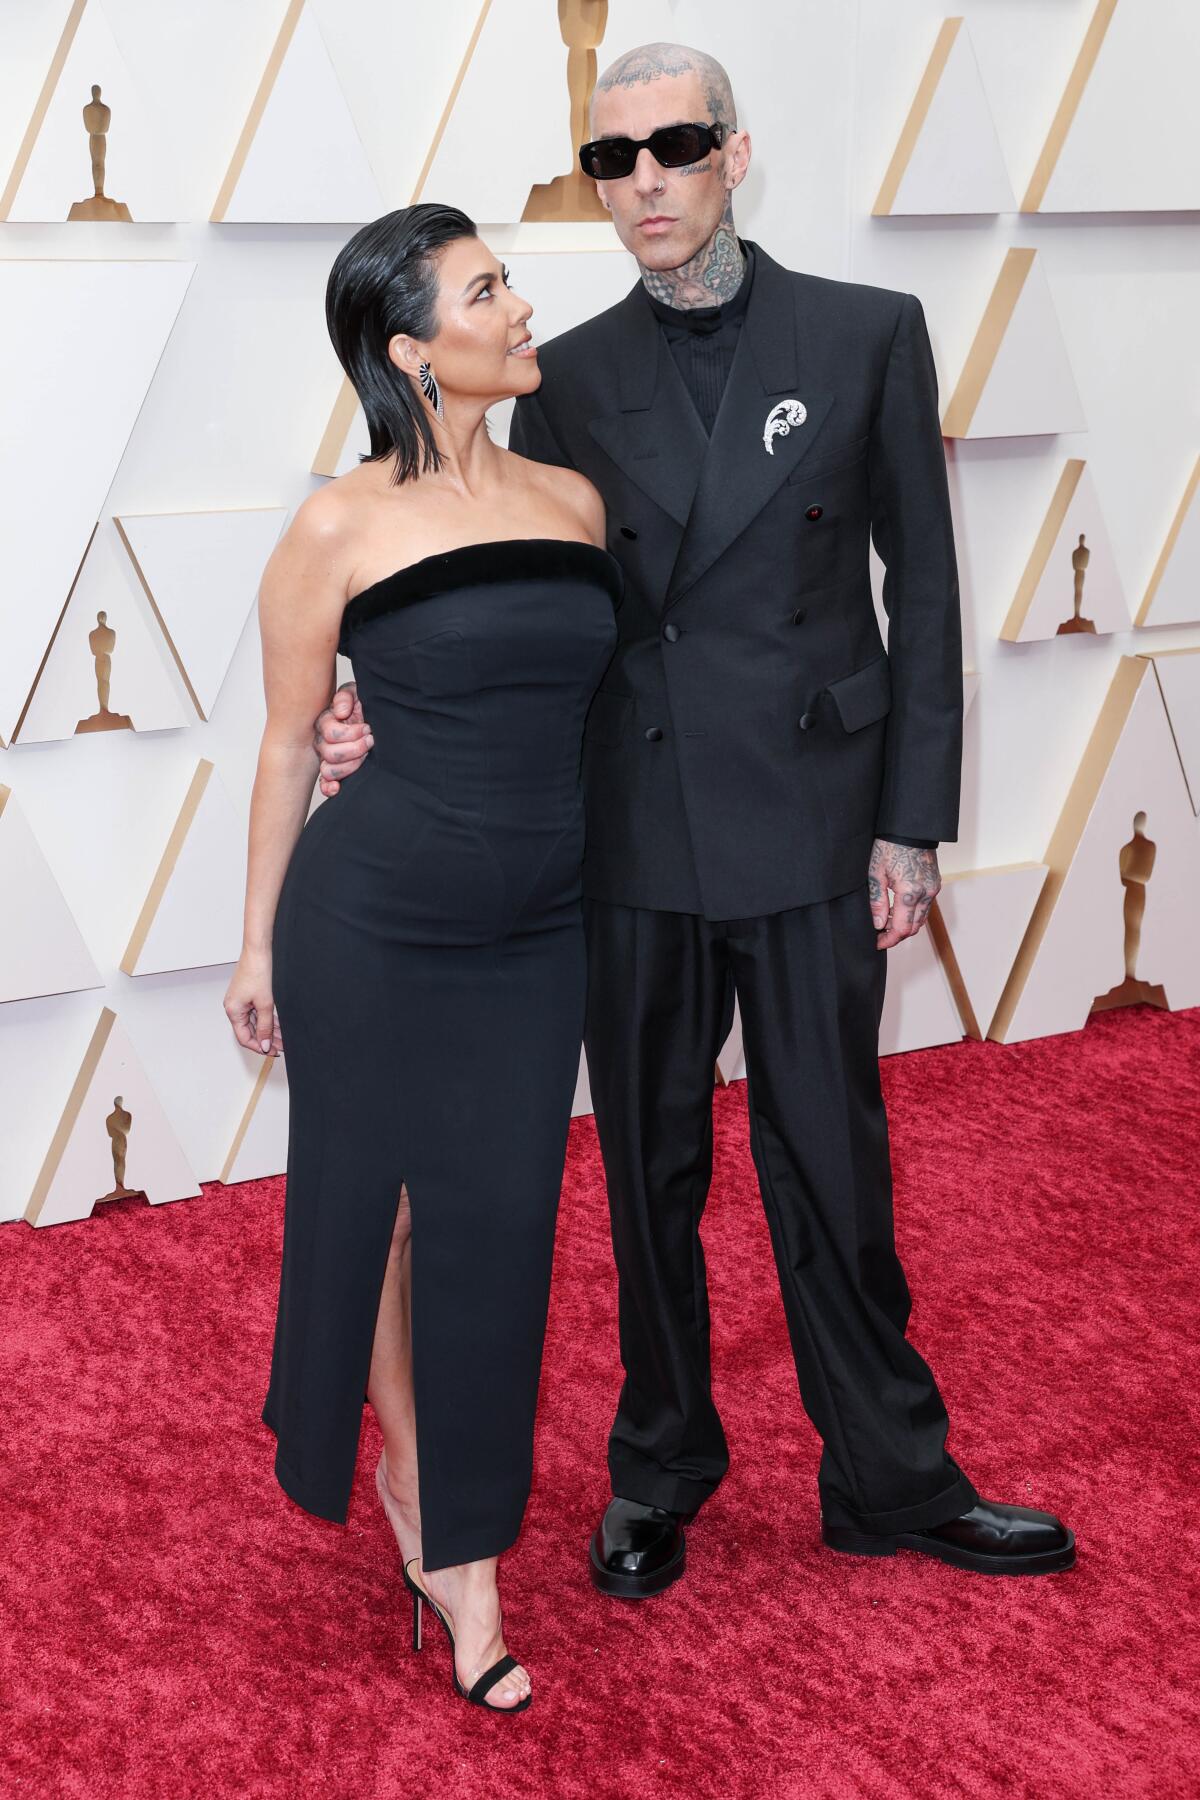 Kourtney Kardashian and Travis Barker are married, for real this time